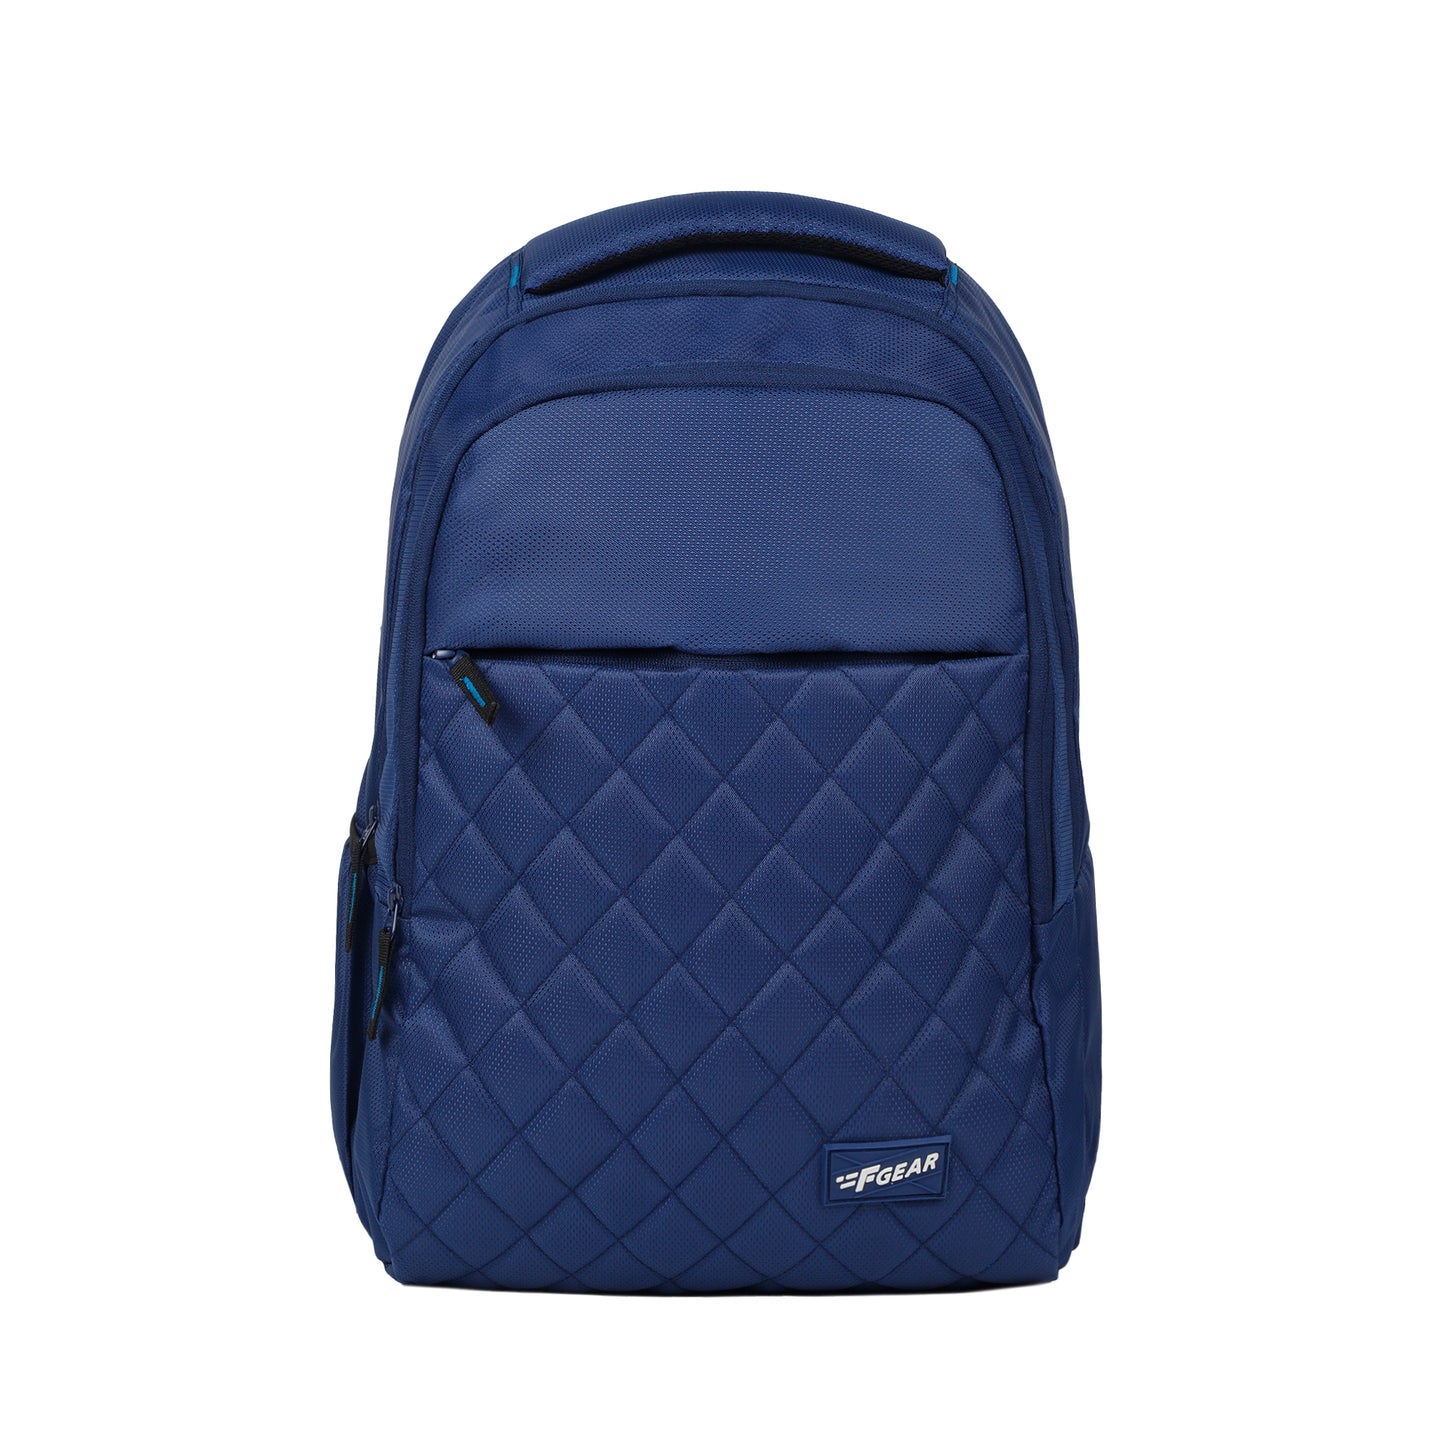 Coach Navy 26L Laptop Backpack with Rain Cover